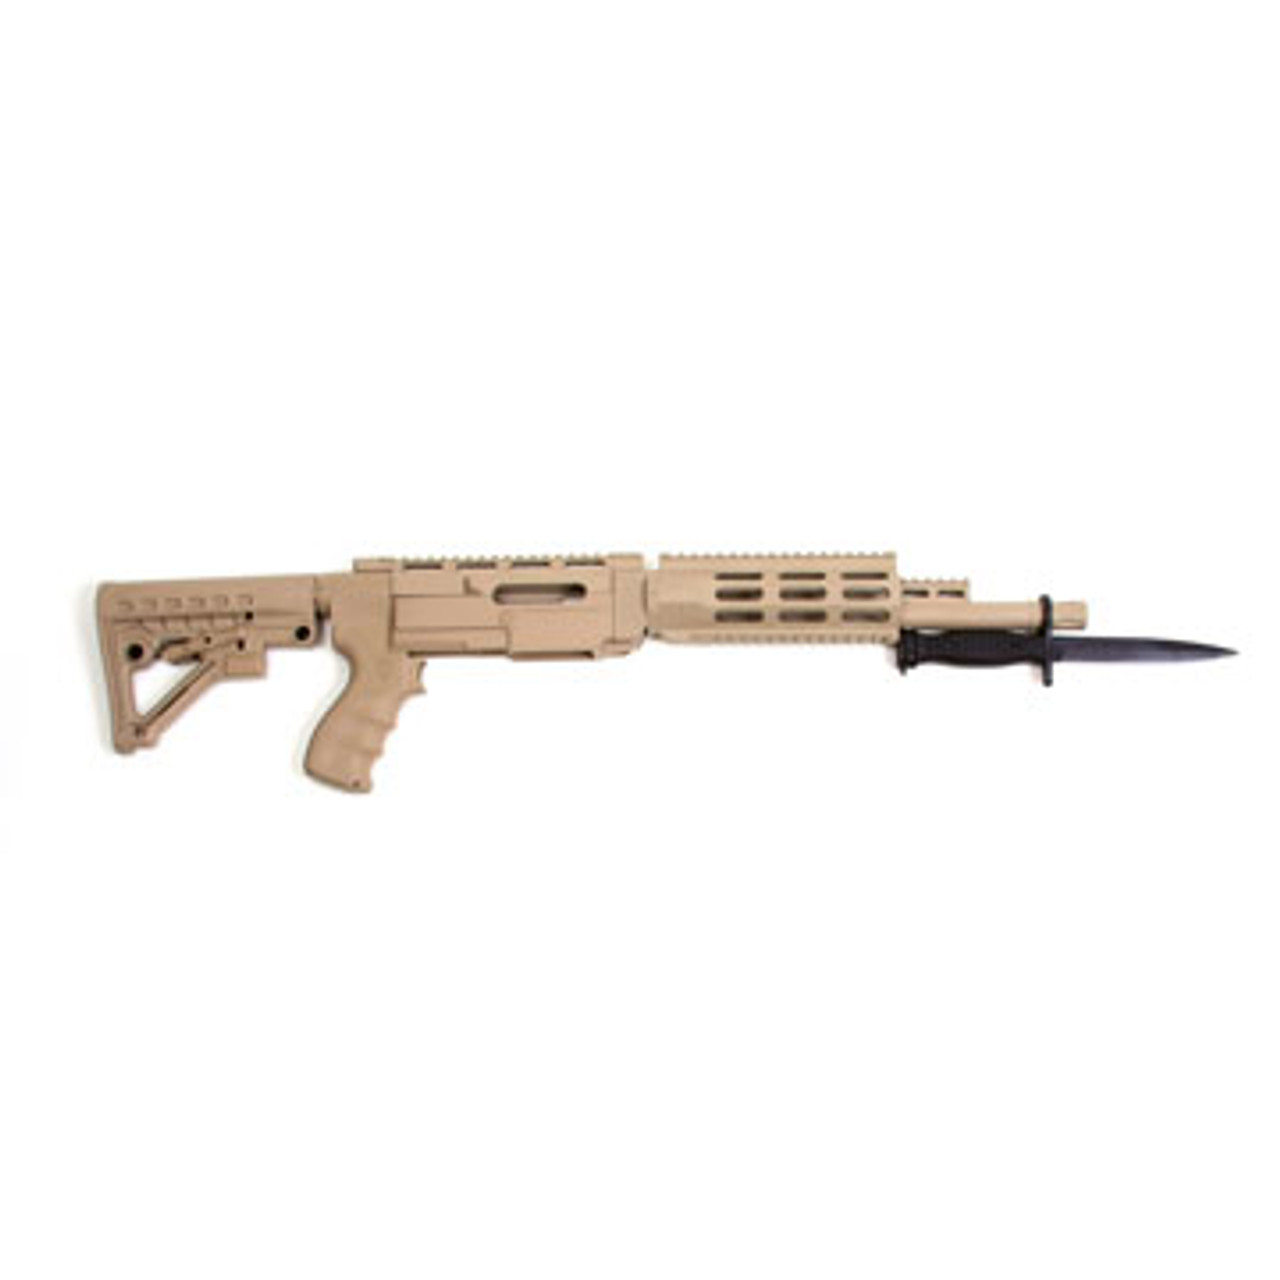 Archangel® 556 AR-15® Style Conversion Stock for Ruger® 10/22® No Bayonet - Desert Tan Polymer